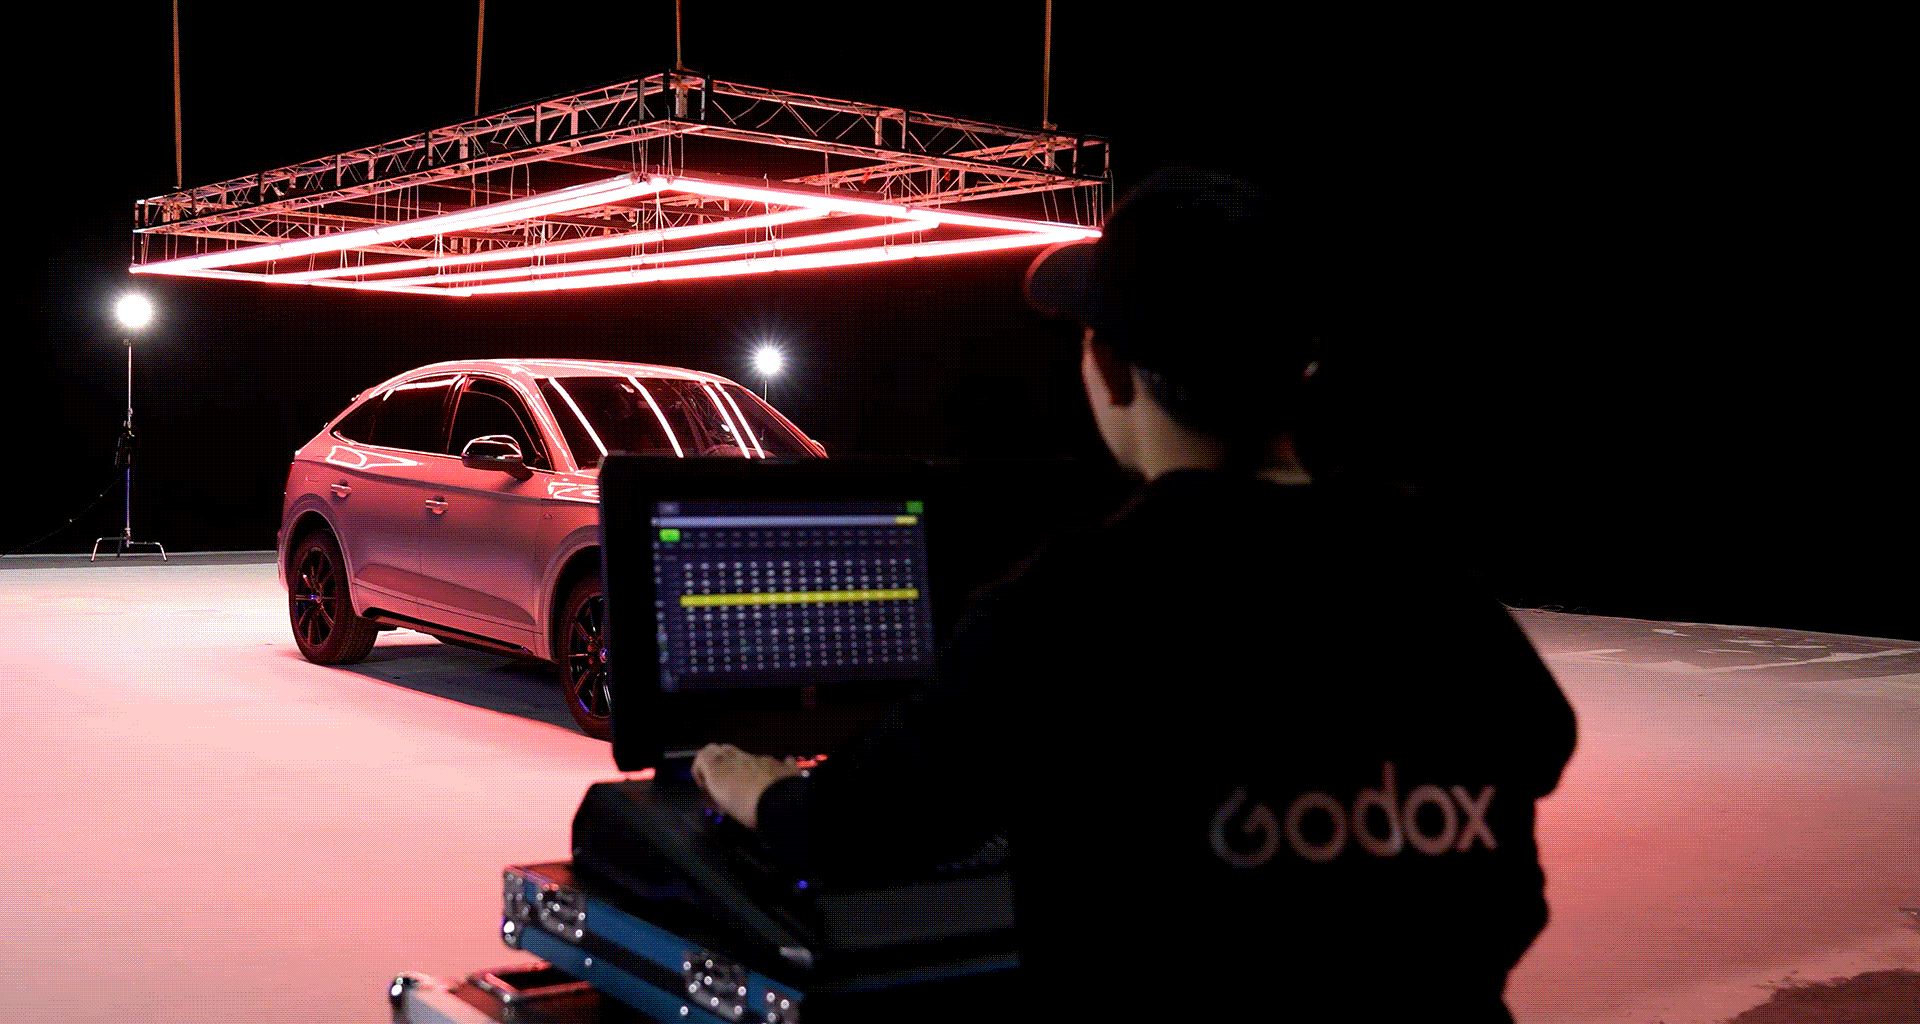 Godox KNOWLED TP4R RGBWW Pixel Tube Light being controlled by a DMX control console